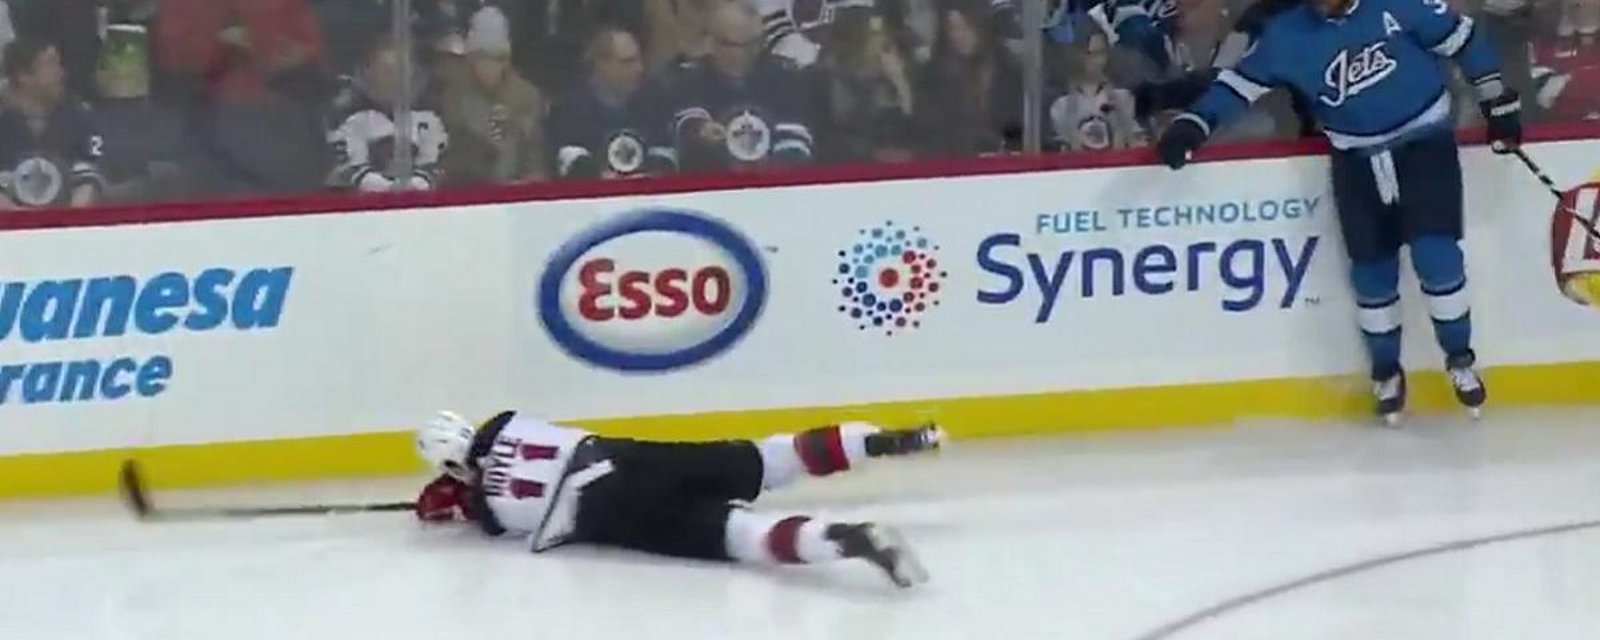 Dustin Byfuglien crushes Boyle, and Devils' fans are calling for a suspension.